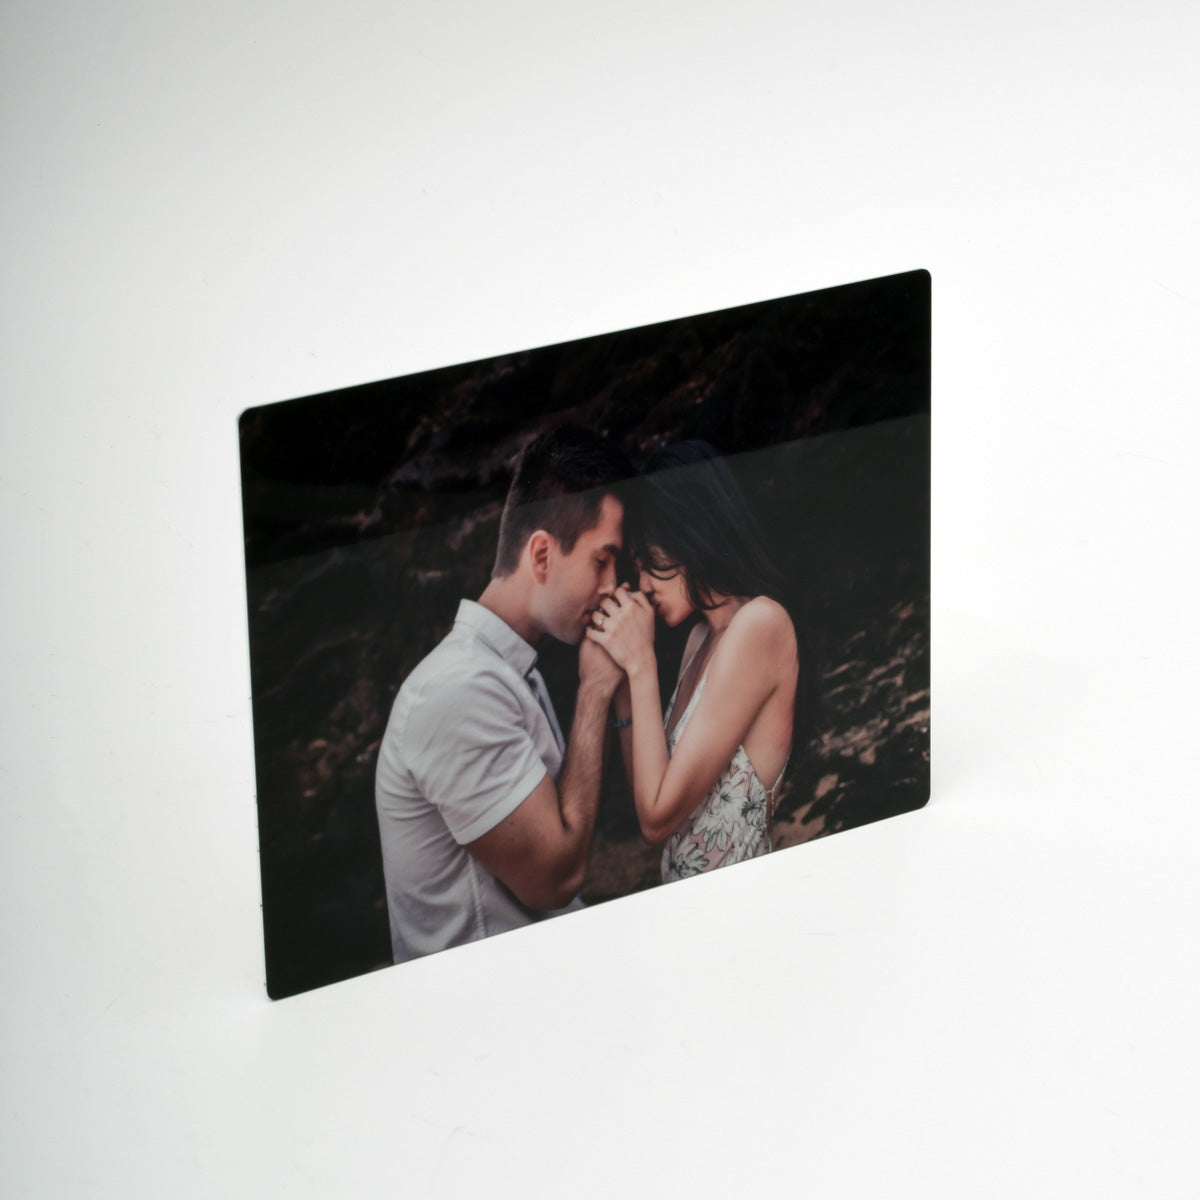 Stunning Engagement Photo Printed on a Metal Mini by Posterjack